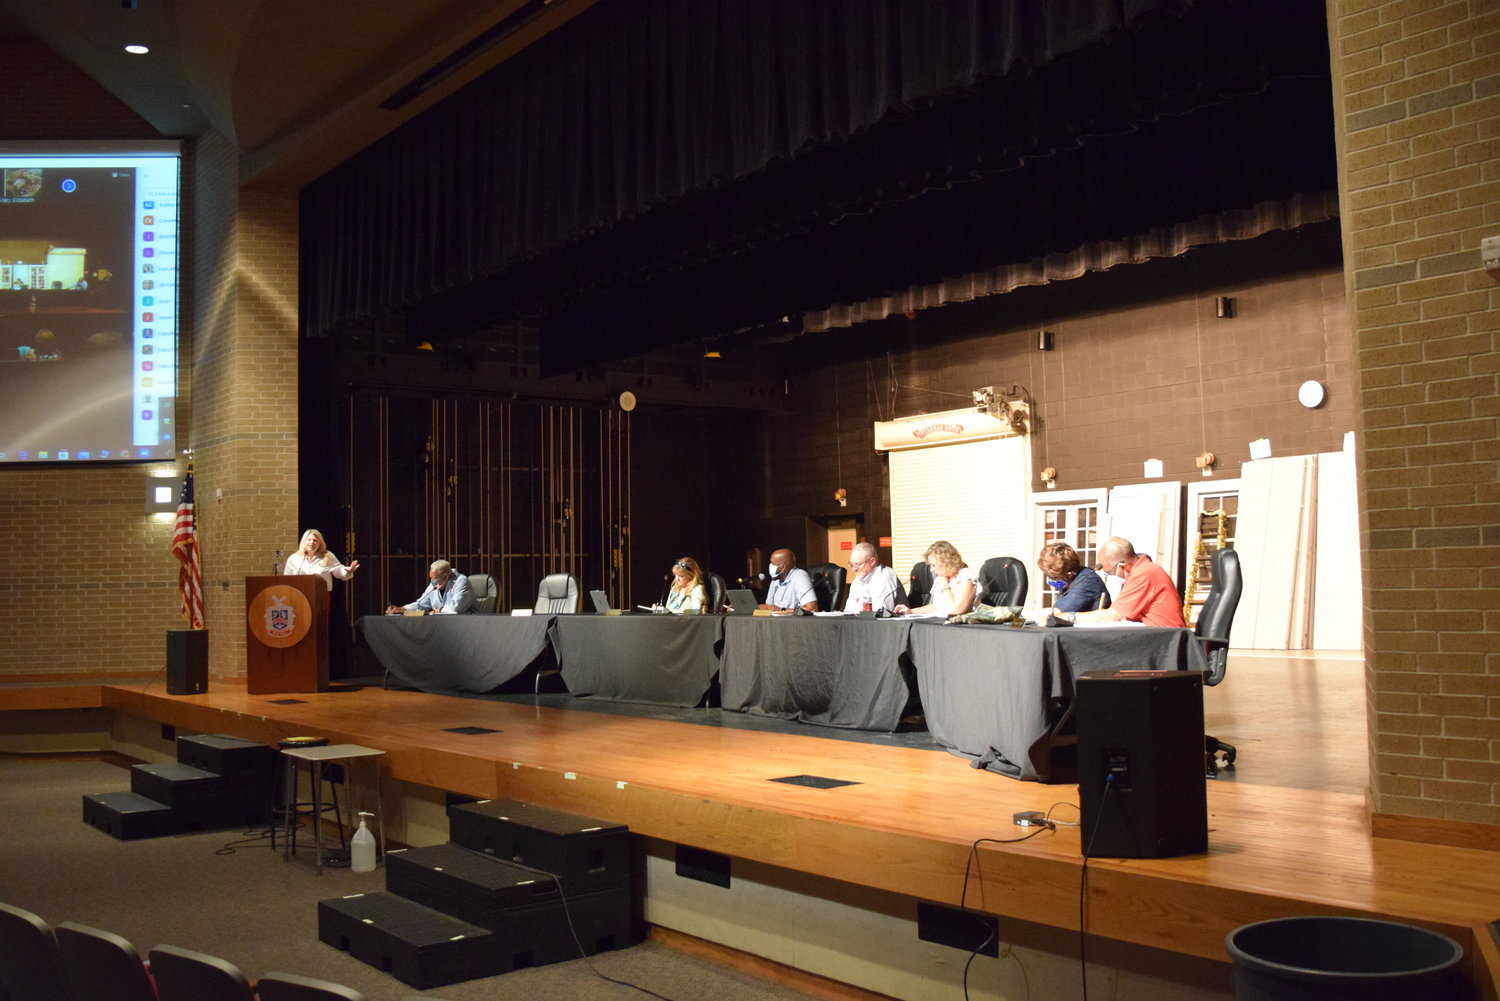 Members of the Royal ISD Board of Trustees met July 19 at the district’s Performing Arts Center which is attached to Royal High School. During the meeting, they heard from Associate Superintendent Kendra Strange (at podium) regarding the district’s test scores which she said lowered during the 2020-21 school year, but on a level similar to that seen across the state from remote schooling during the pandemic. Seated from left to right: Position 4 Trustee Nathaniel Richardson, Jr., Position 5 Trustee Melissa Woods, President and Position 3 Trustee Michael Glover, Superintendent Rick Kershner, Position 2 Trustee Cheri Fontenot, Position 7 Trustee Rose Jones and Position 6 Trustee Elton Foster.